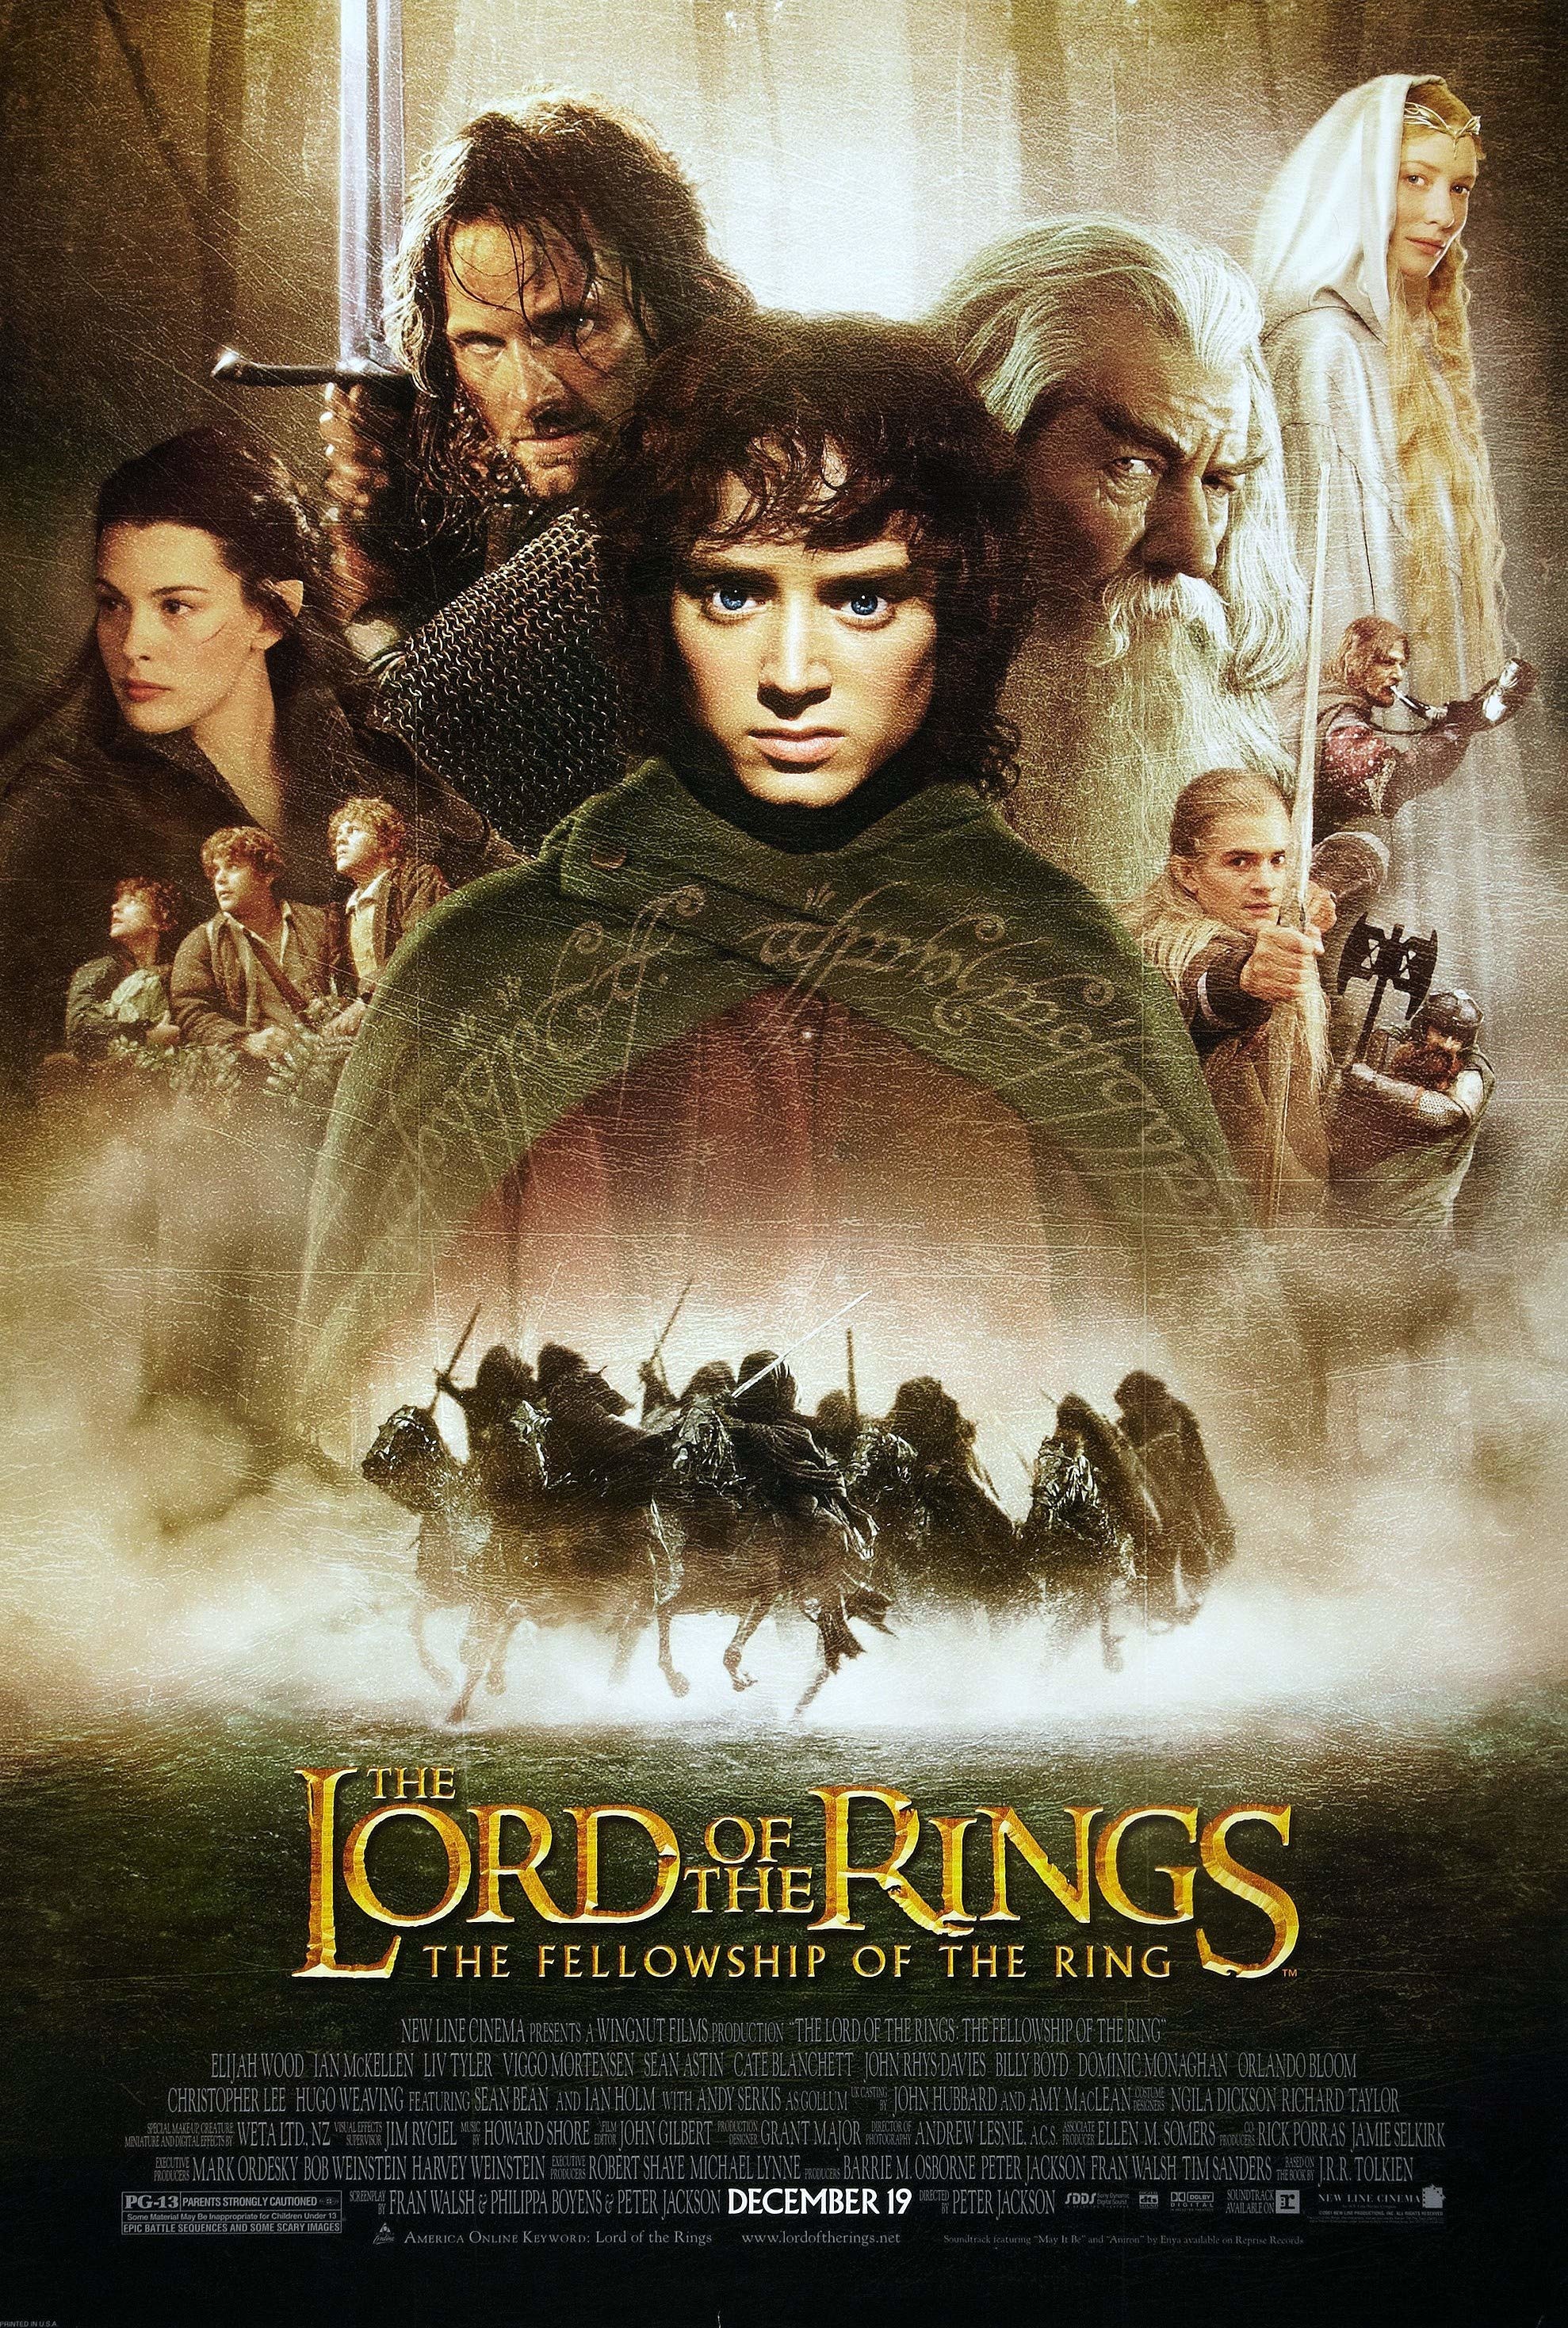 The Lord of the Rings - The Fellowship of the Ring.jpg